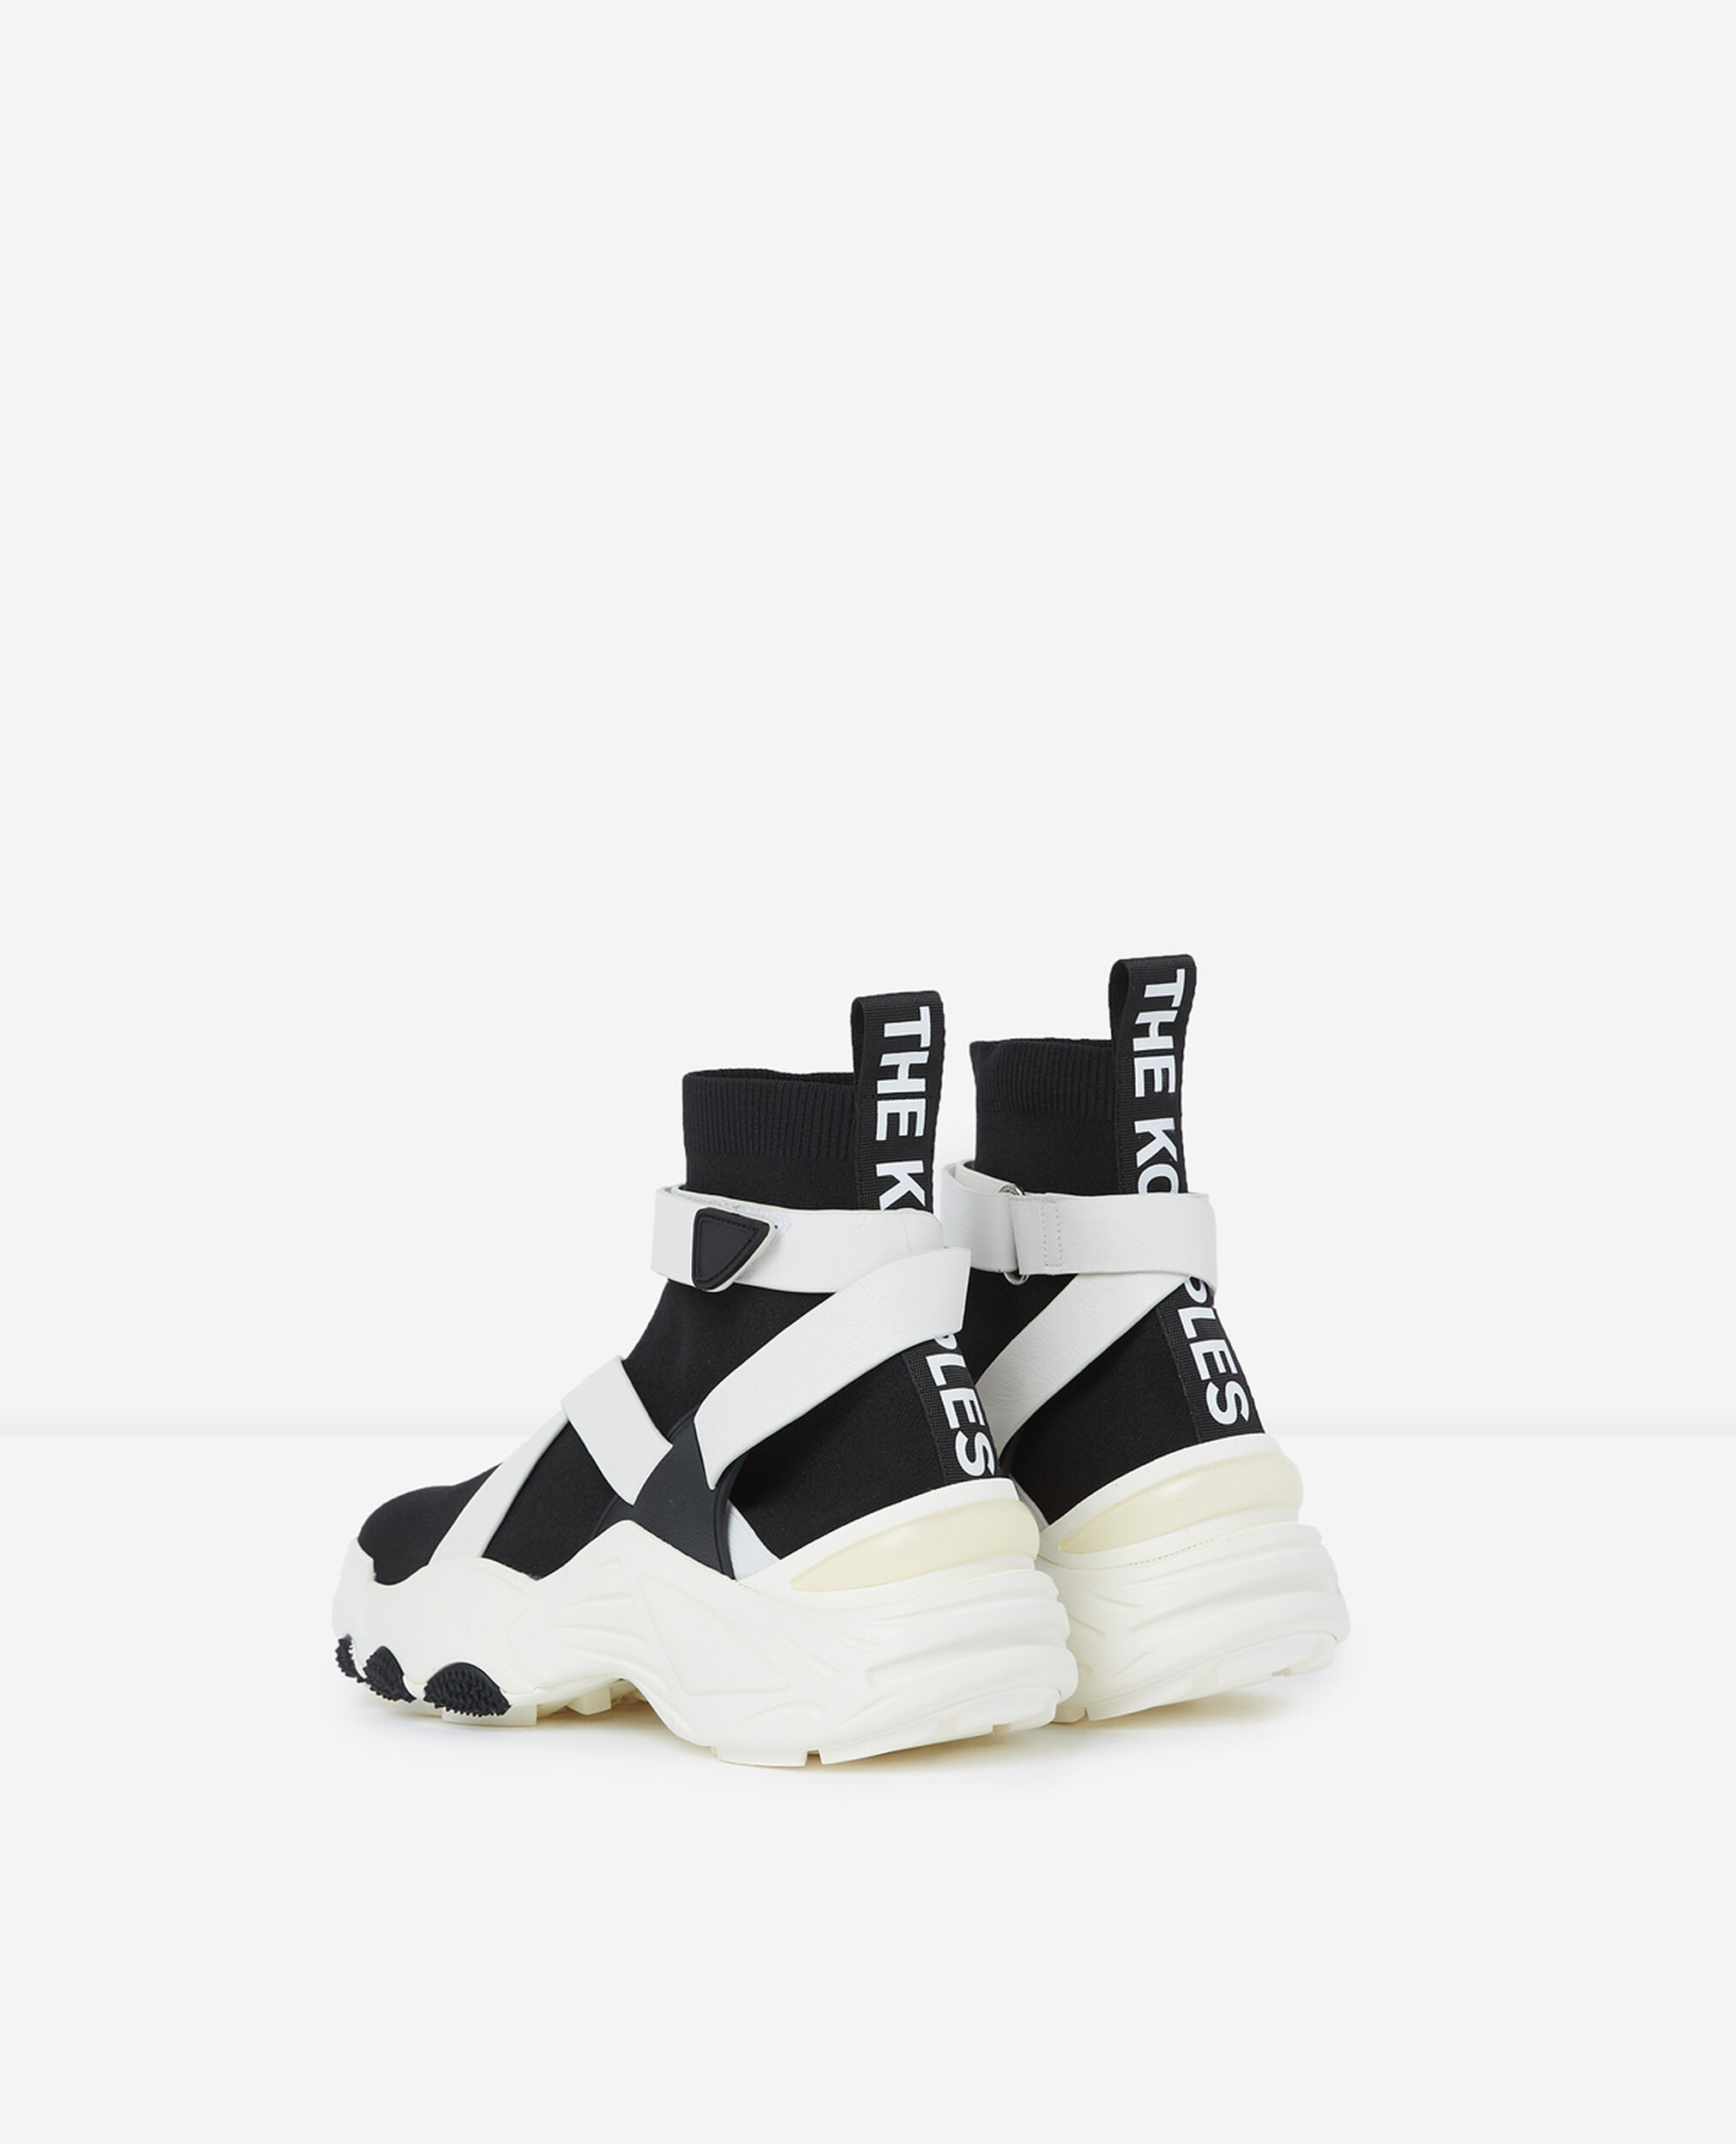 Sneakers, BLACK / WHITE, hi-res image number null